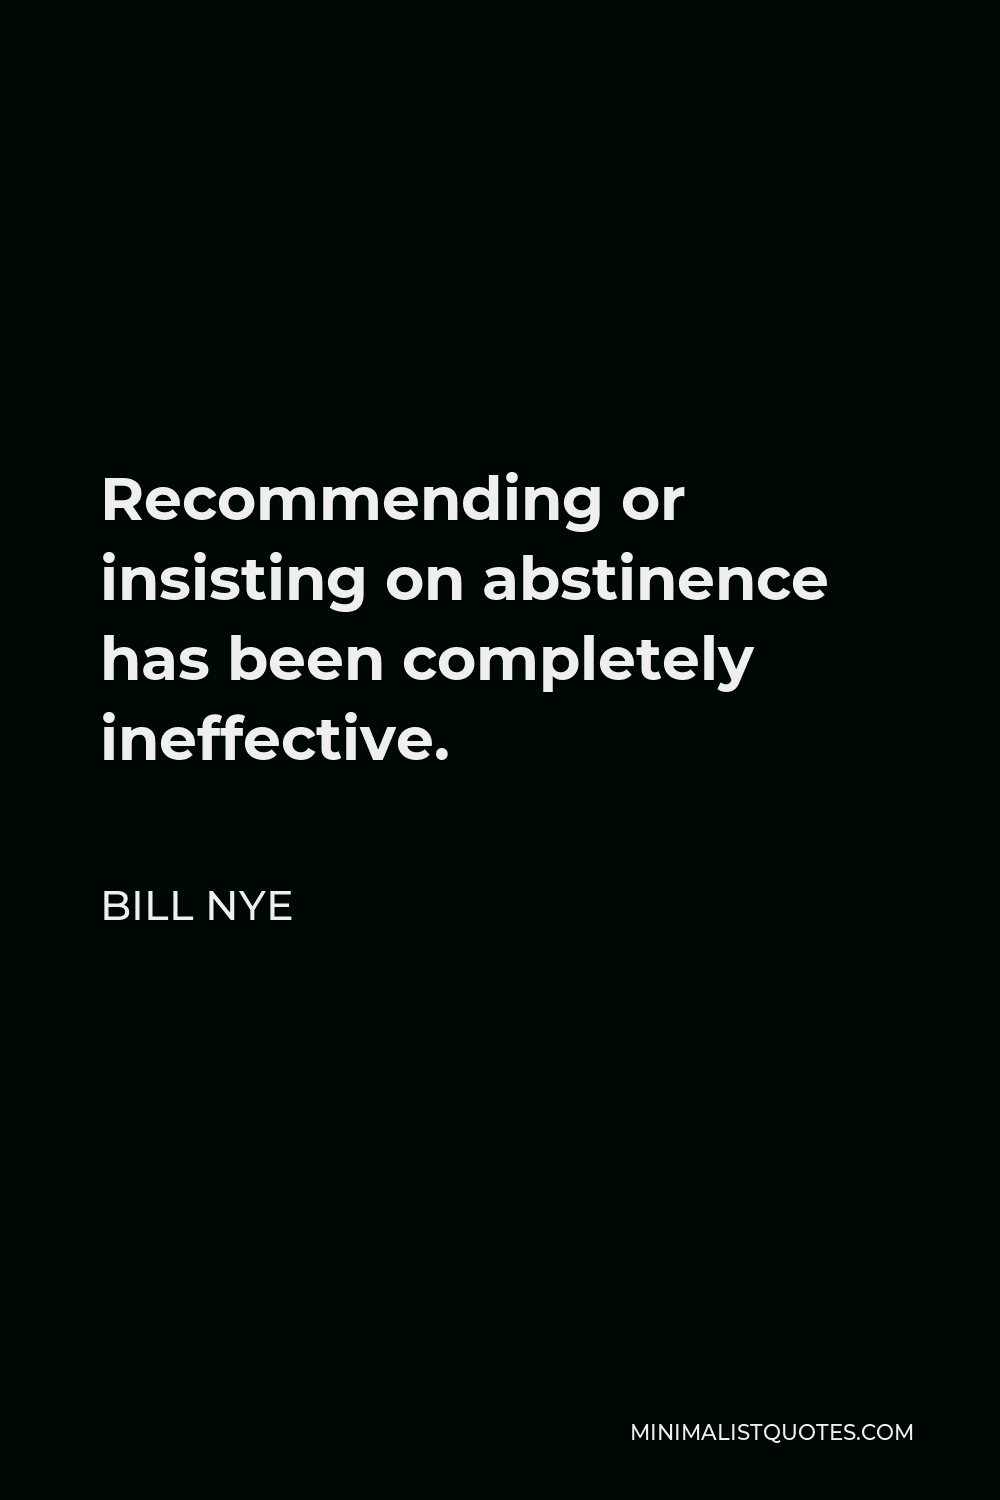 Bill Nye Quote - Recommending or insisting on abstinence has been completely ineffective.